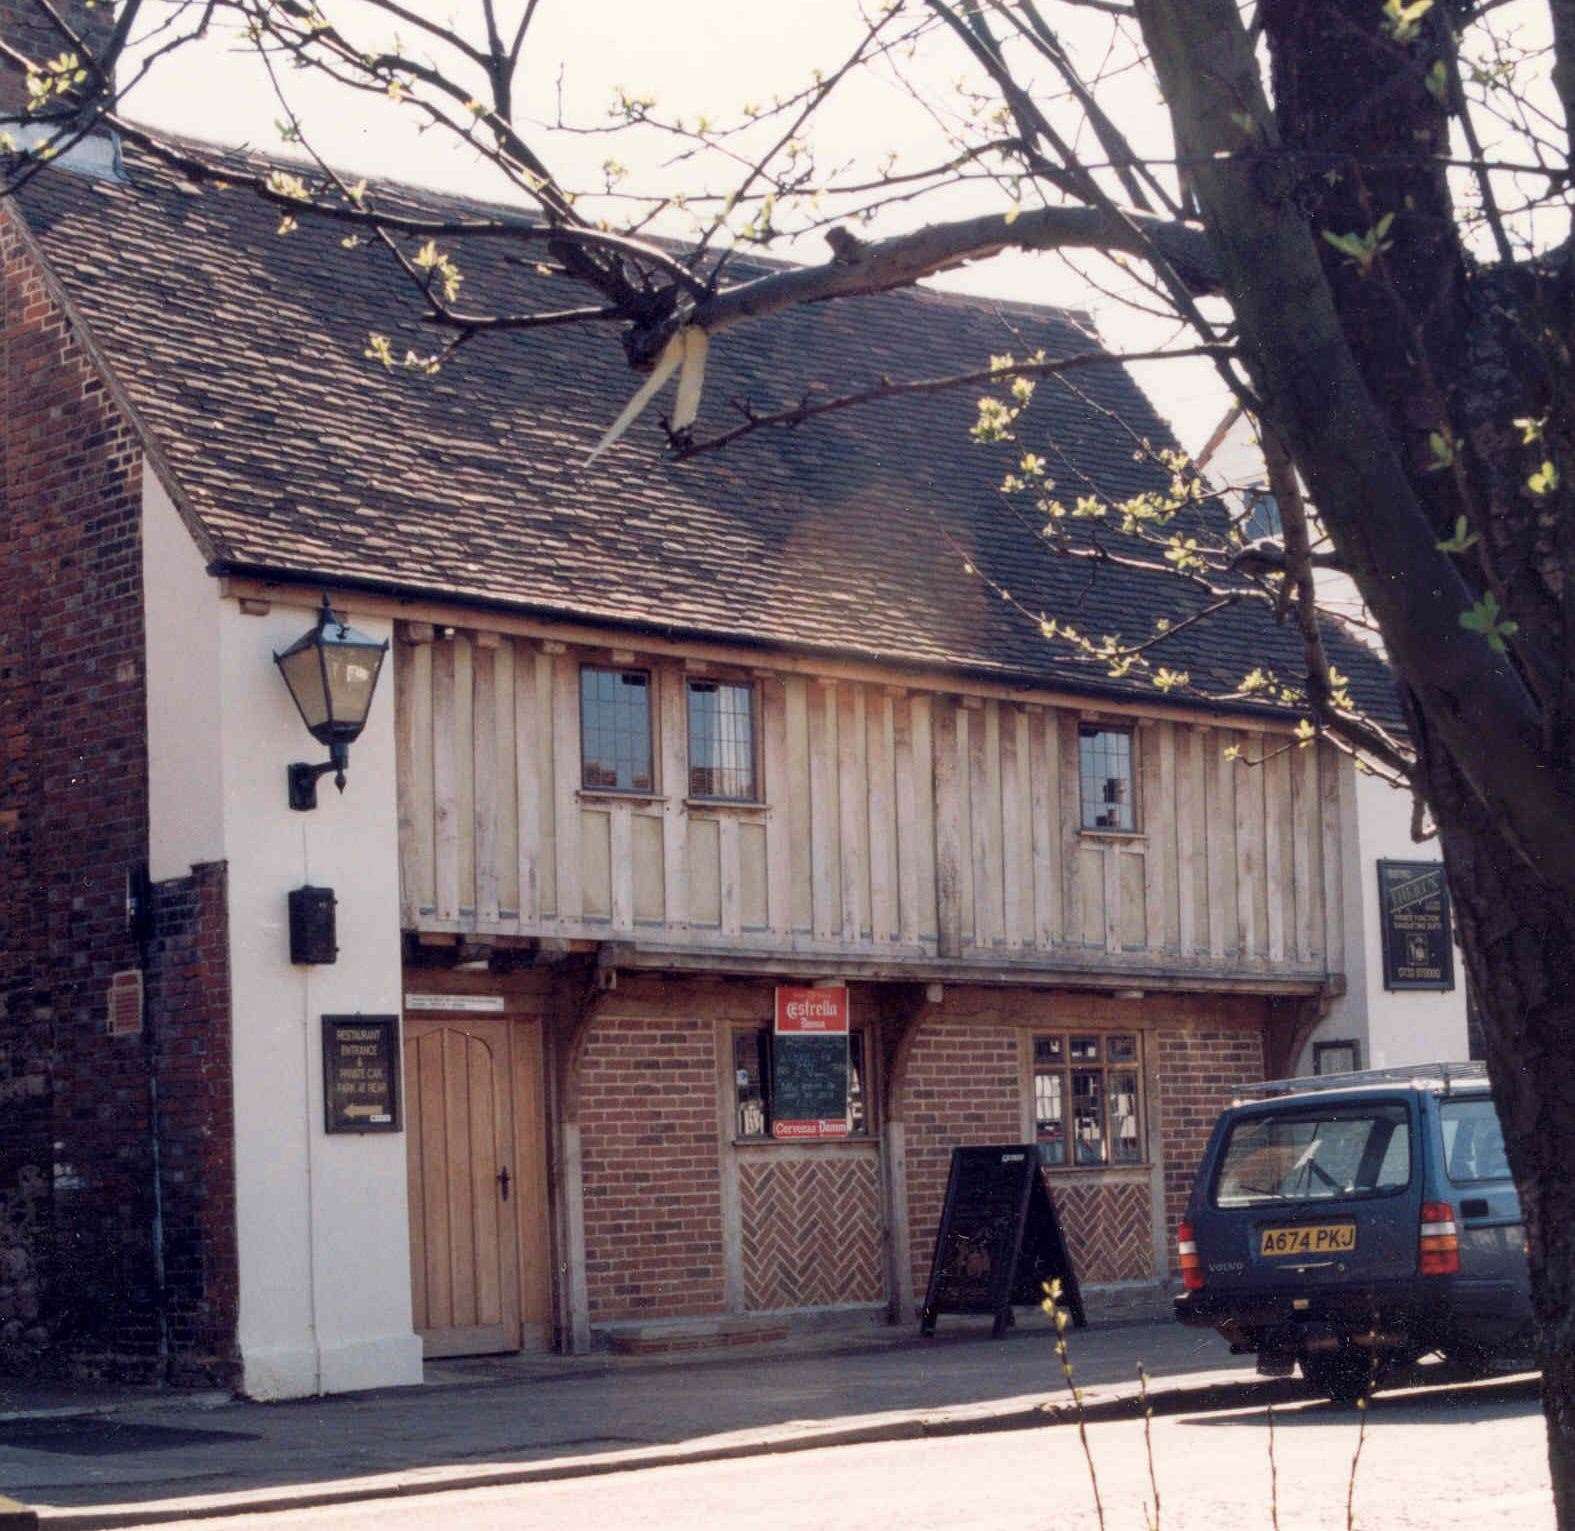 Enrico's restaurant in West malling High Street, file pic dated 1995